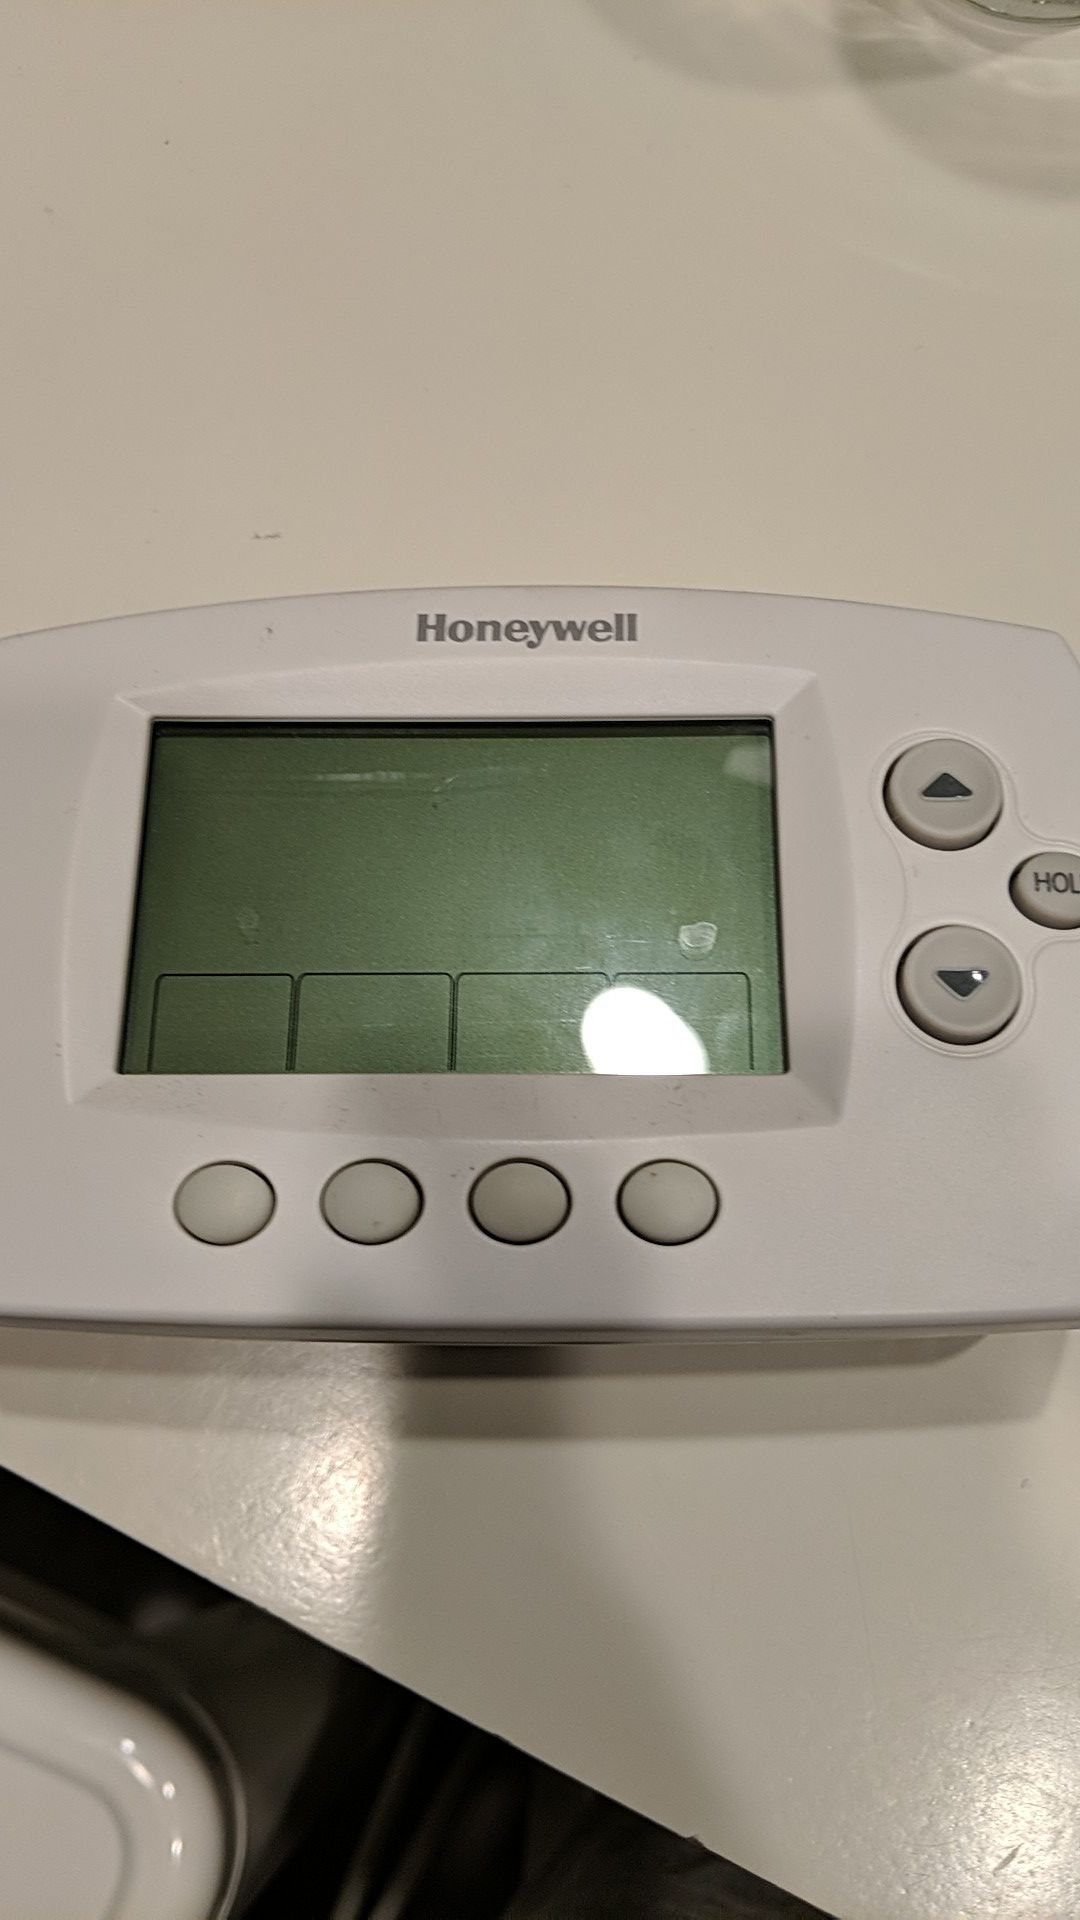 Free Honeywell thermostat WiFi ready and App controlled